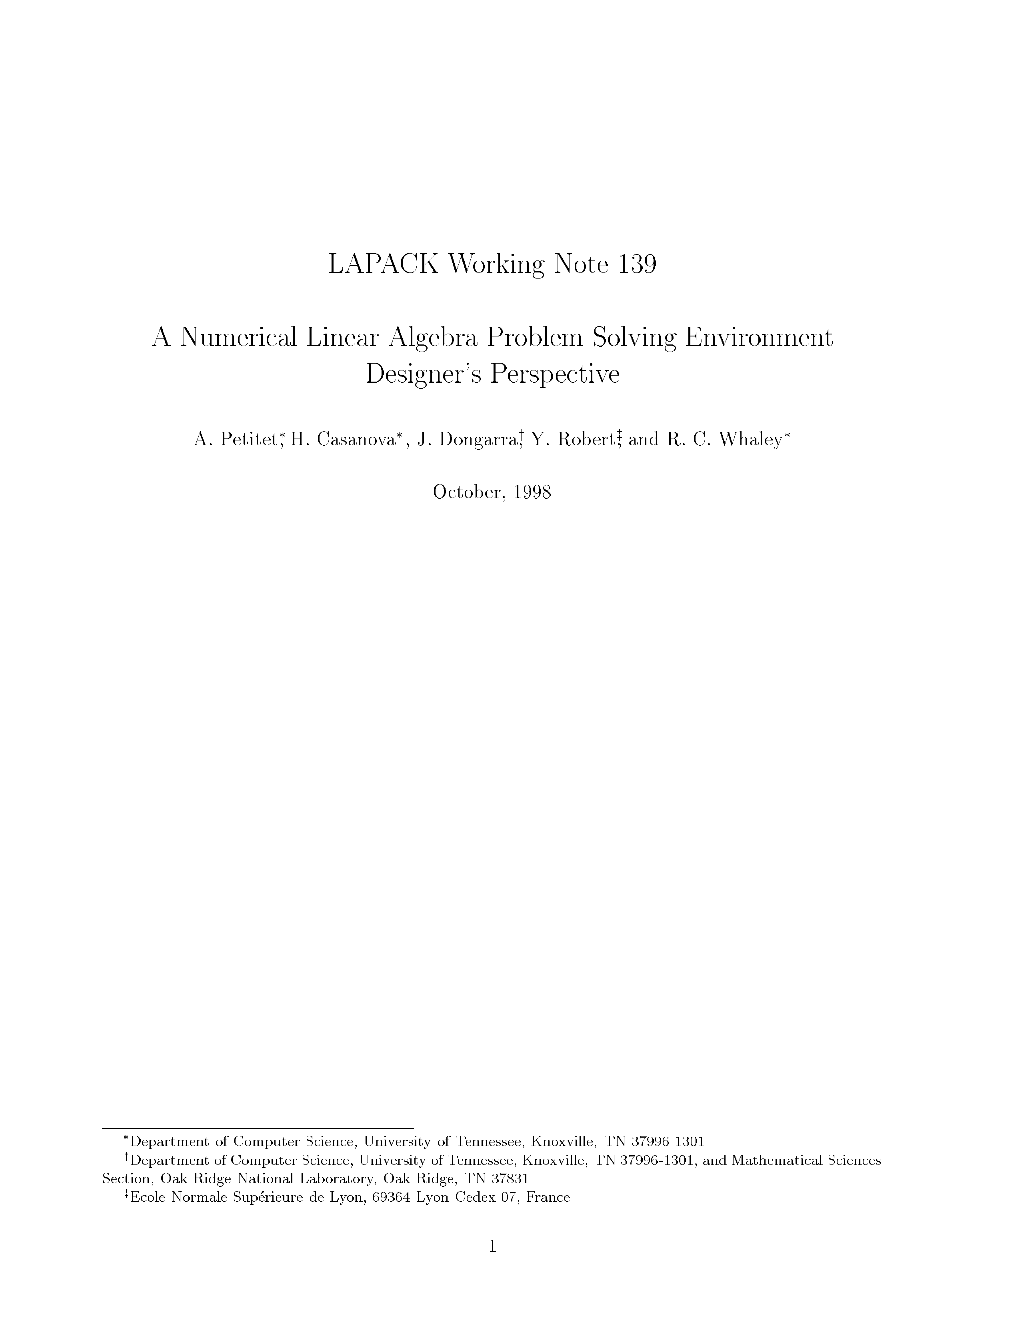 LAPACK Working Note 139 a Numerical Linear Algebra Problem